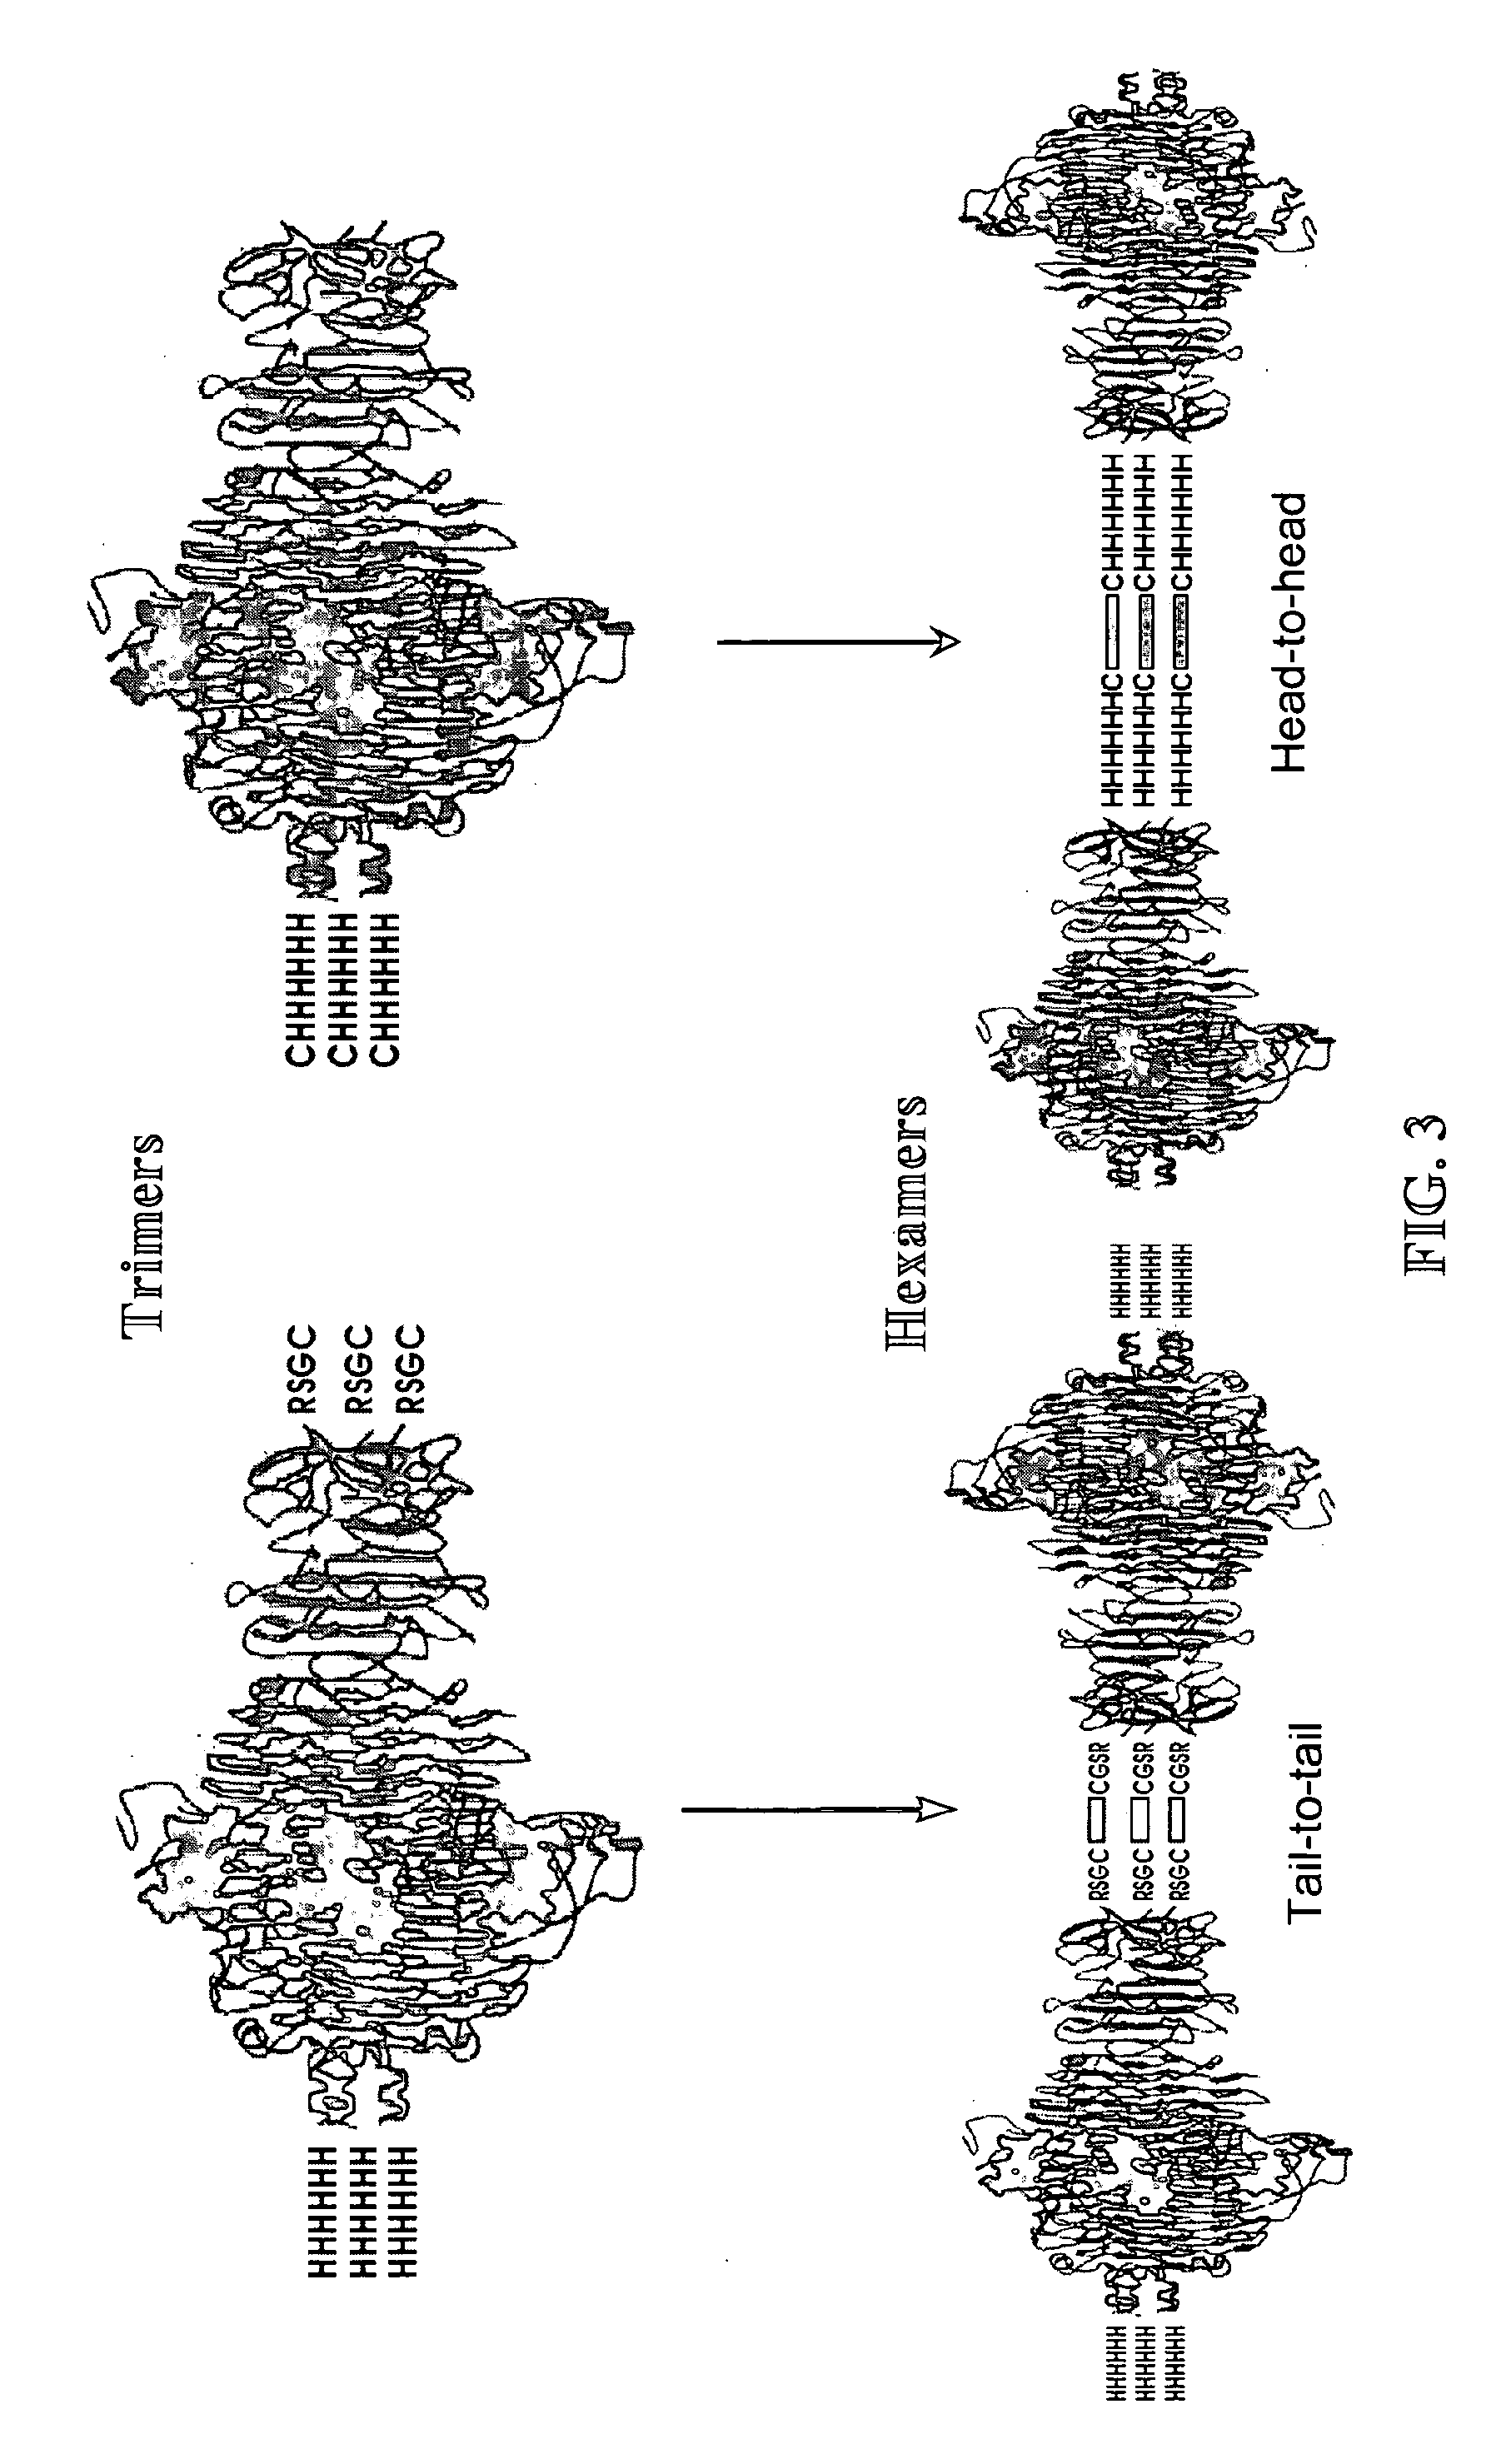 Phage receptor binding proteins for antibacterial therapy and other novel uses